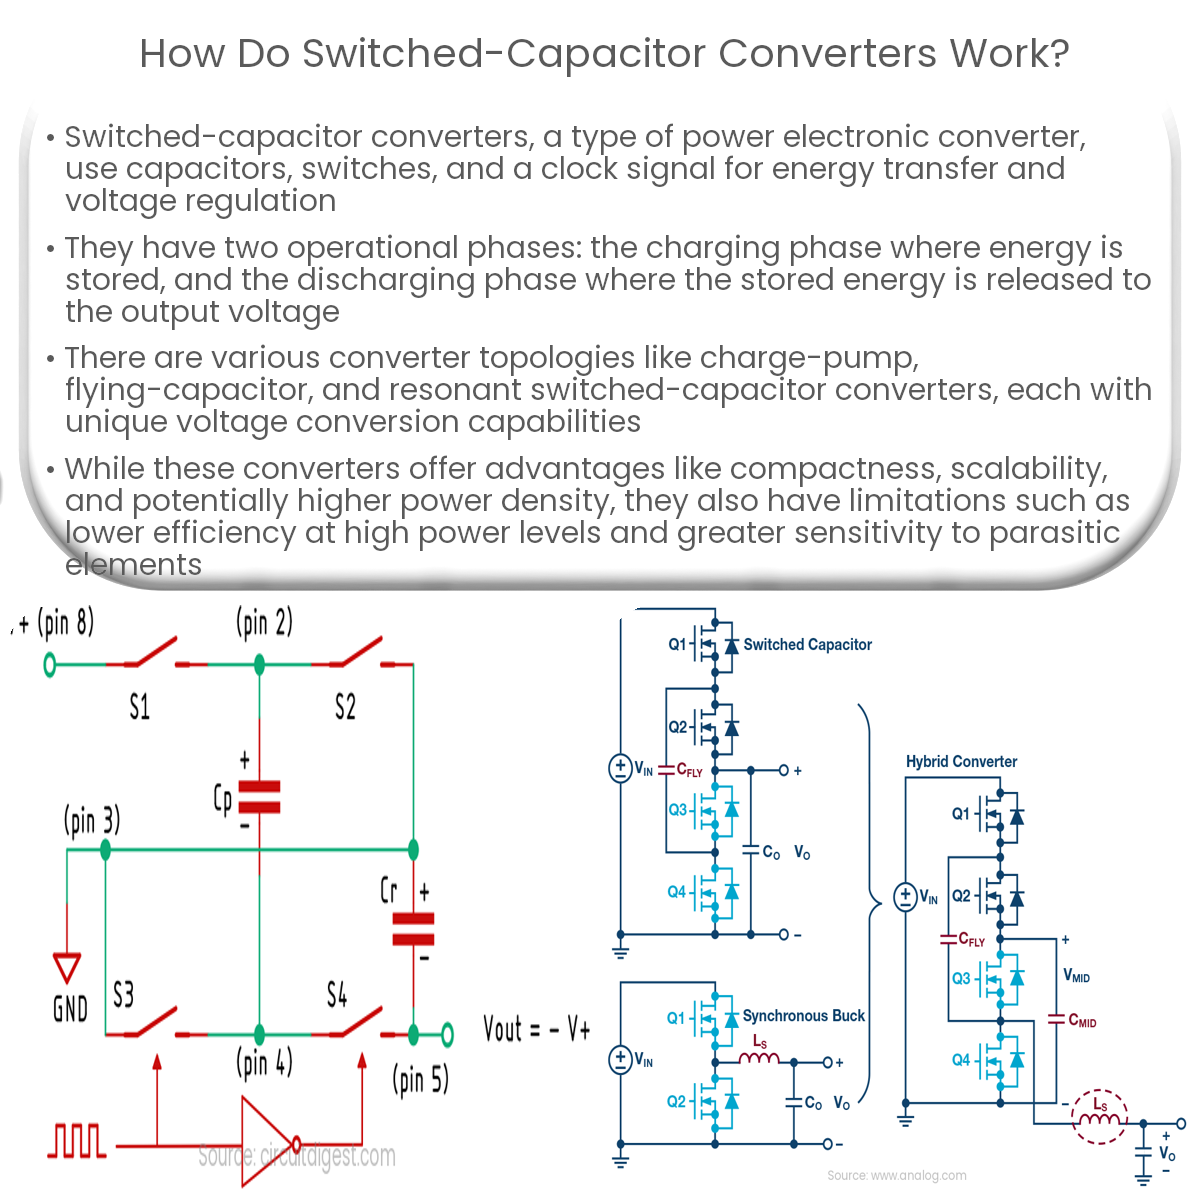 How do switched-capacitor converters work?